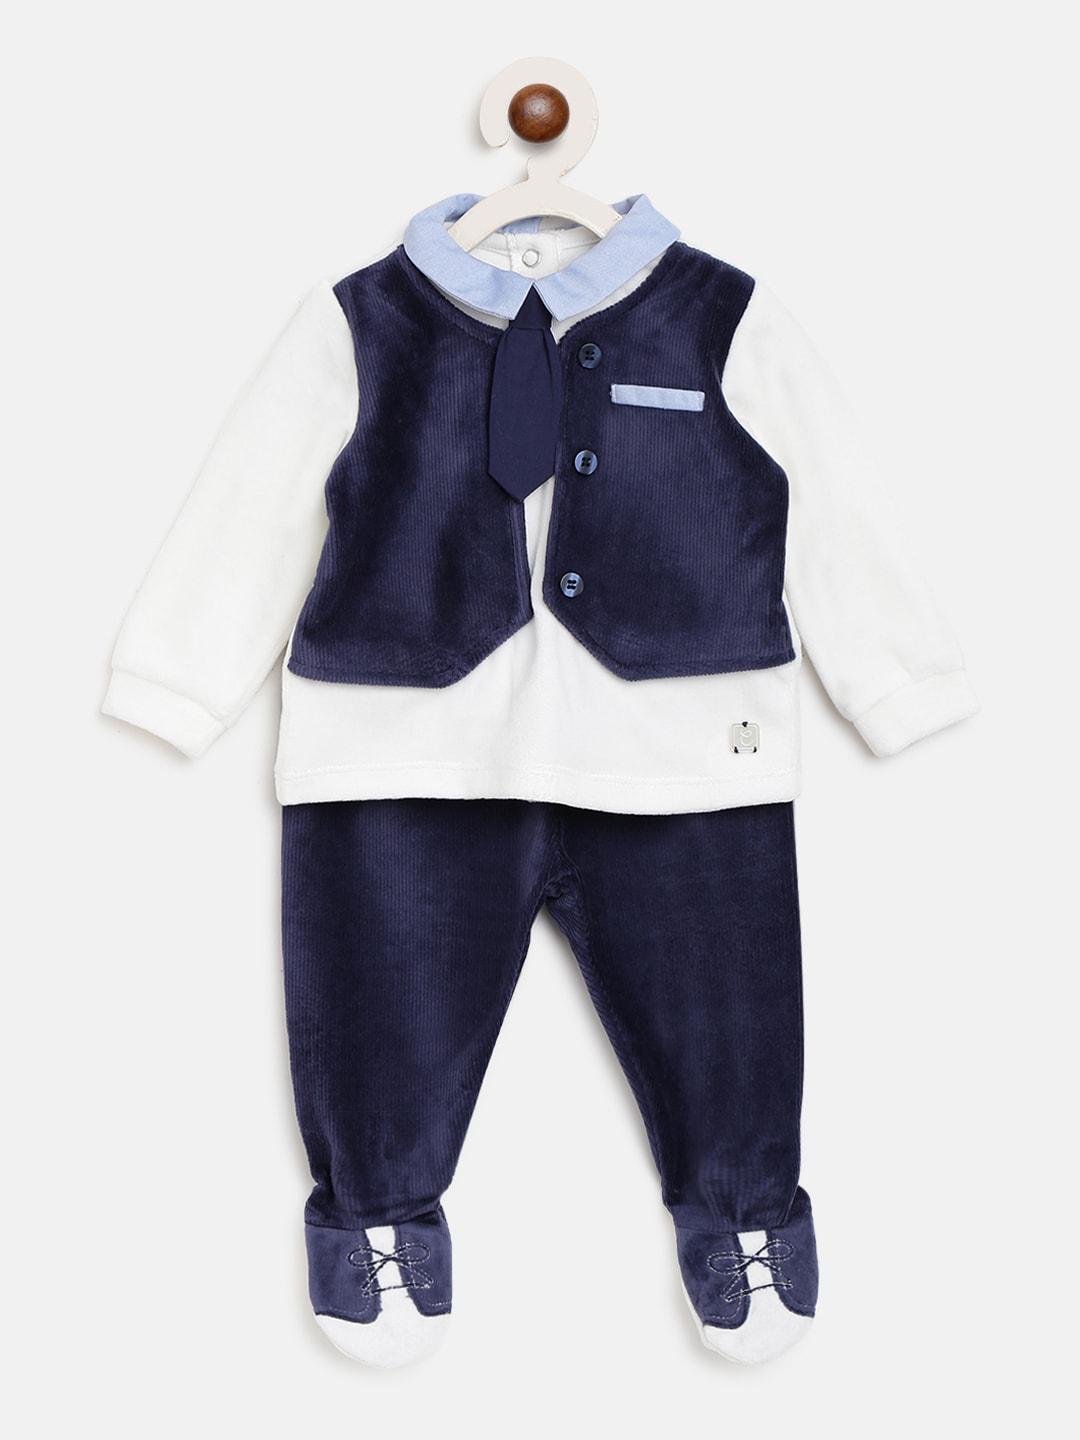 Chicco Infant Boys Navy Blue & White Solid Clothing Set